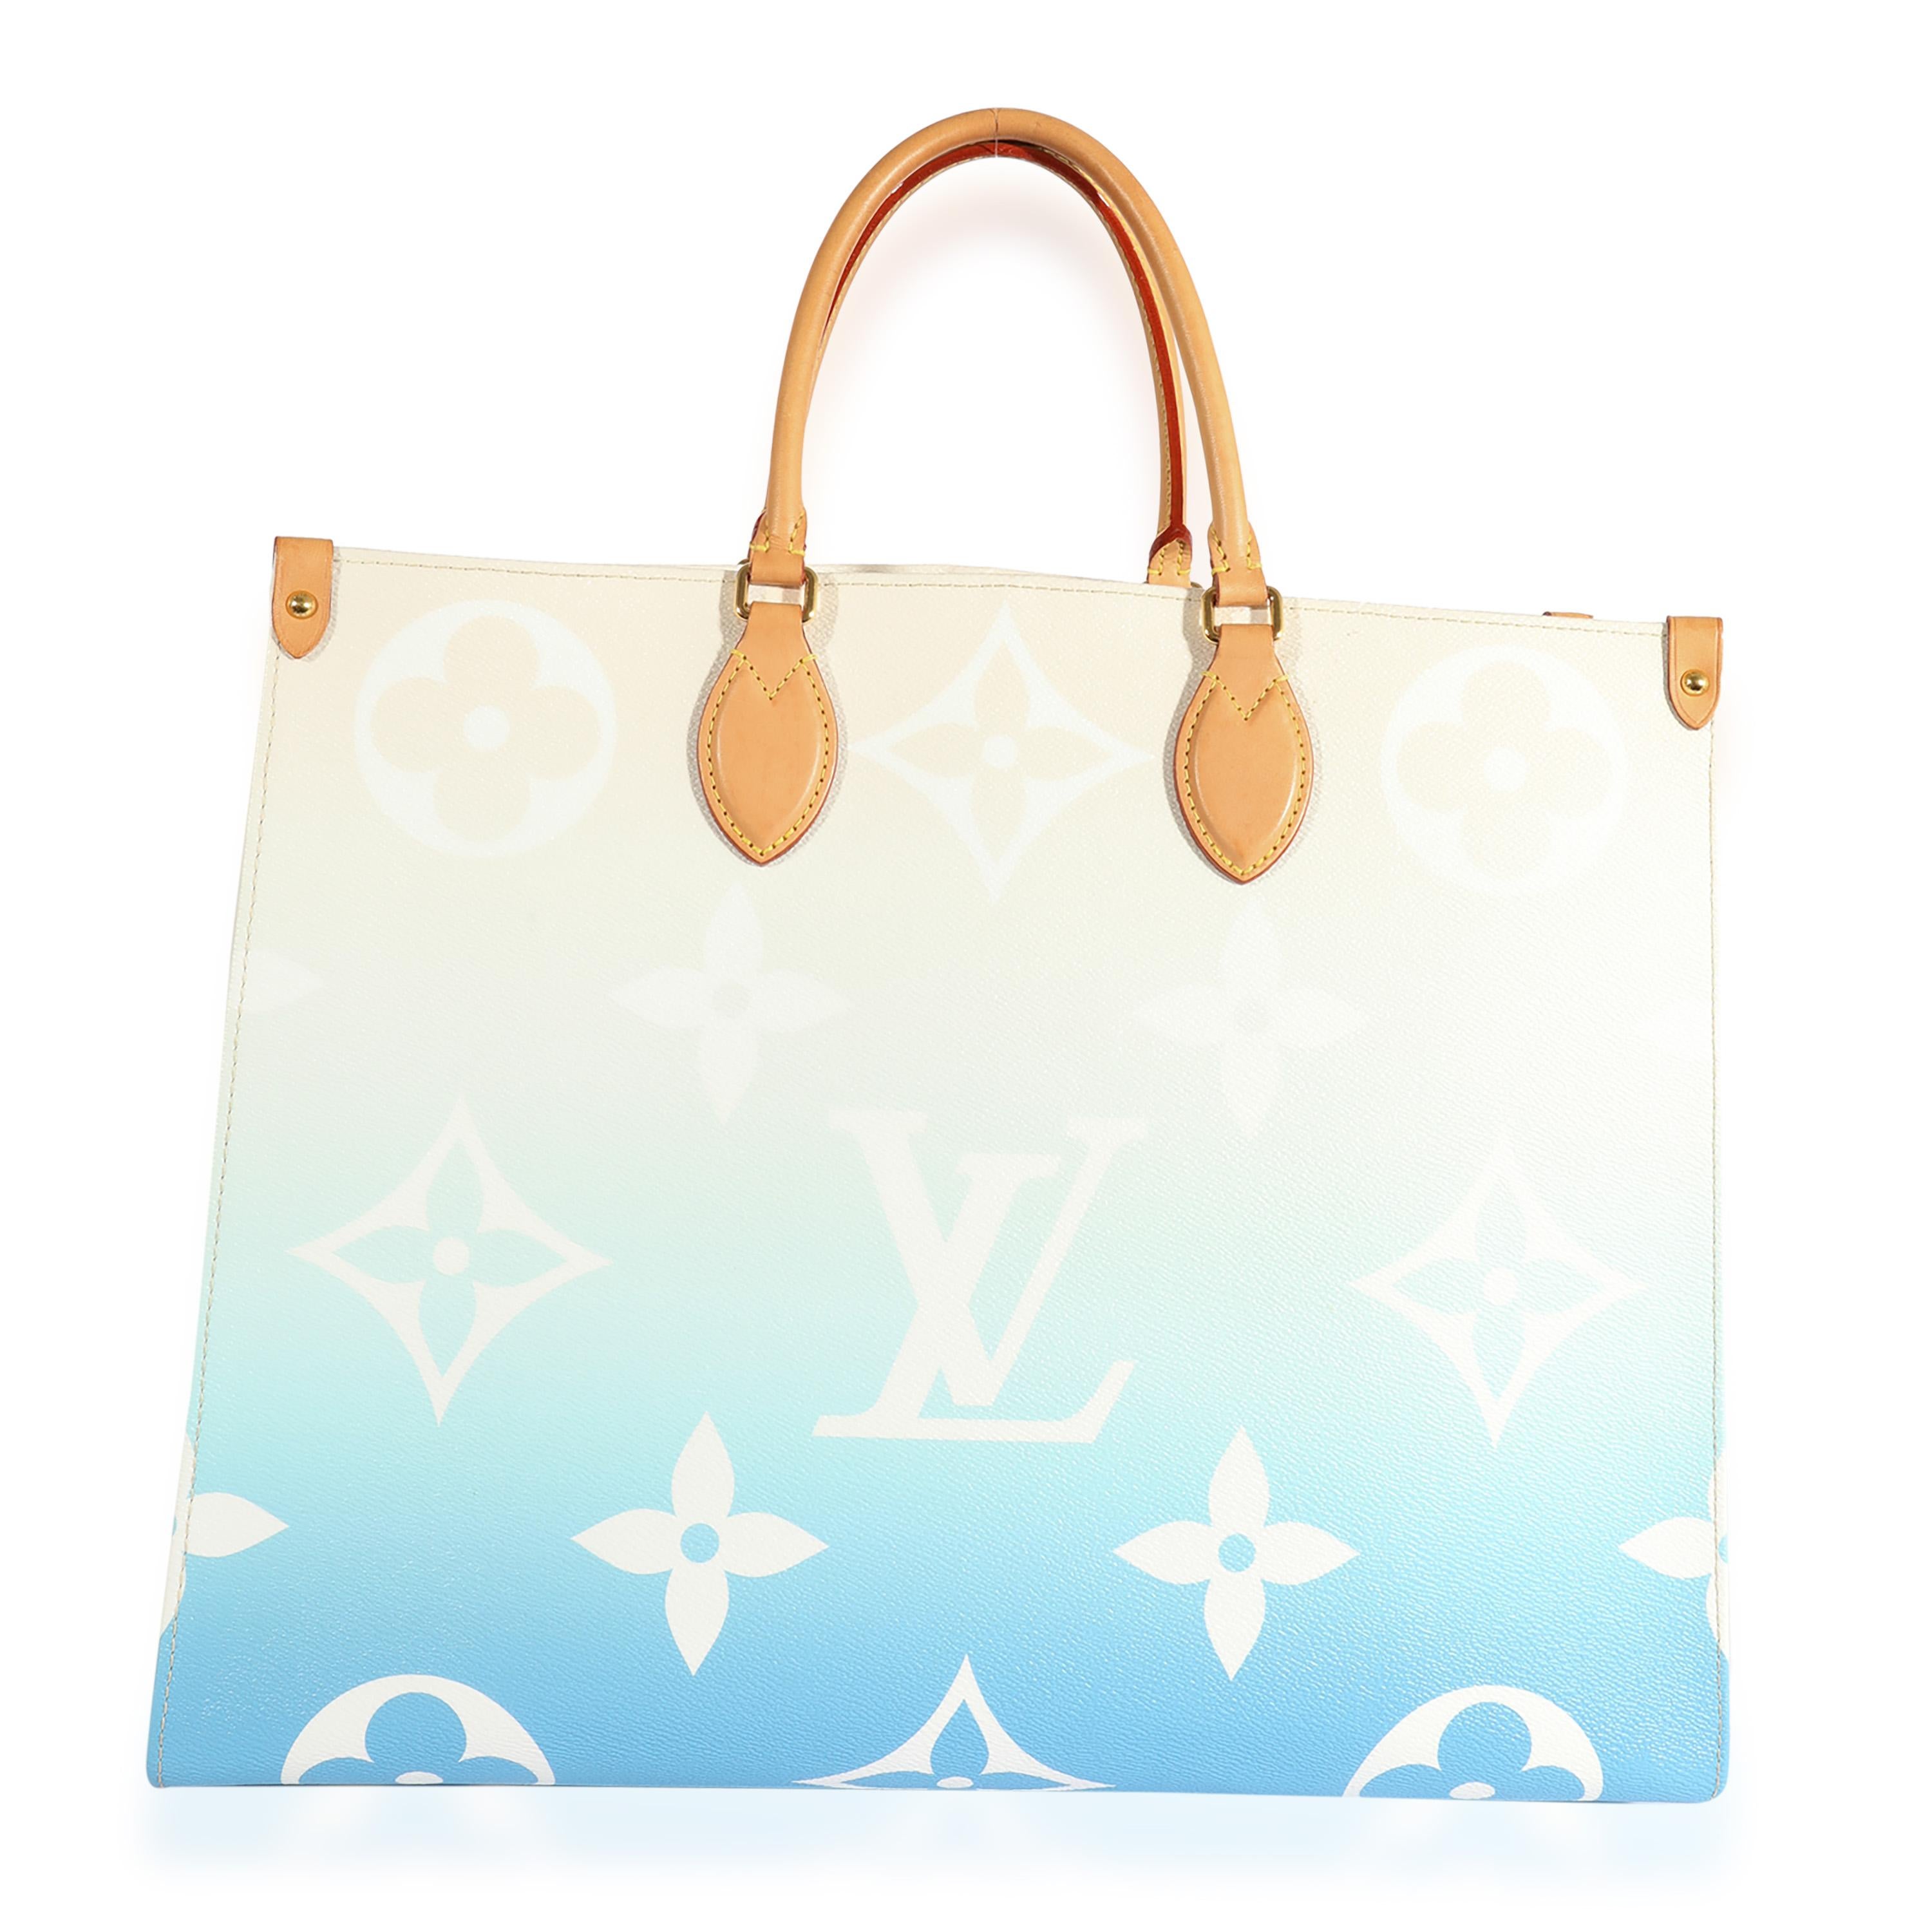 Listing Title: Louis Vuitton Blue Monogram Giant By The Pool Onthego GM
SKU: 124063
Condition: Pre-owned 
Handbag Condition: Very Good
Condition Comments: Very Good Condition. Light scuffing to corners. Light patina and marks to leather trim. Light